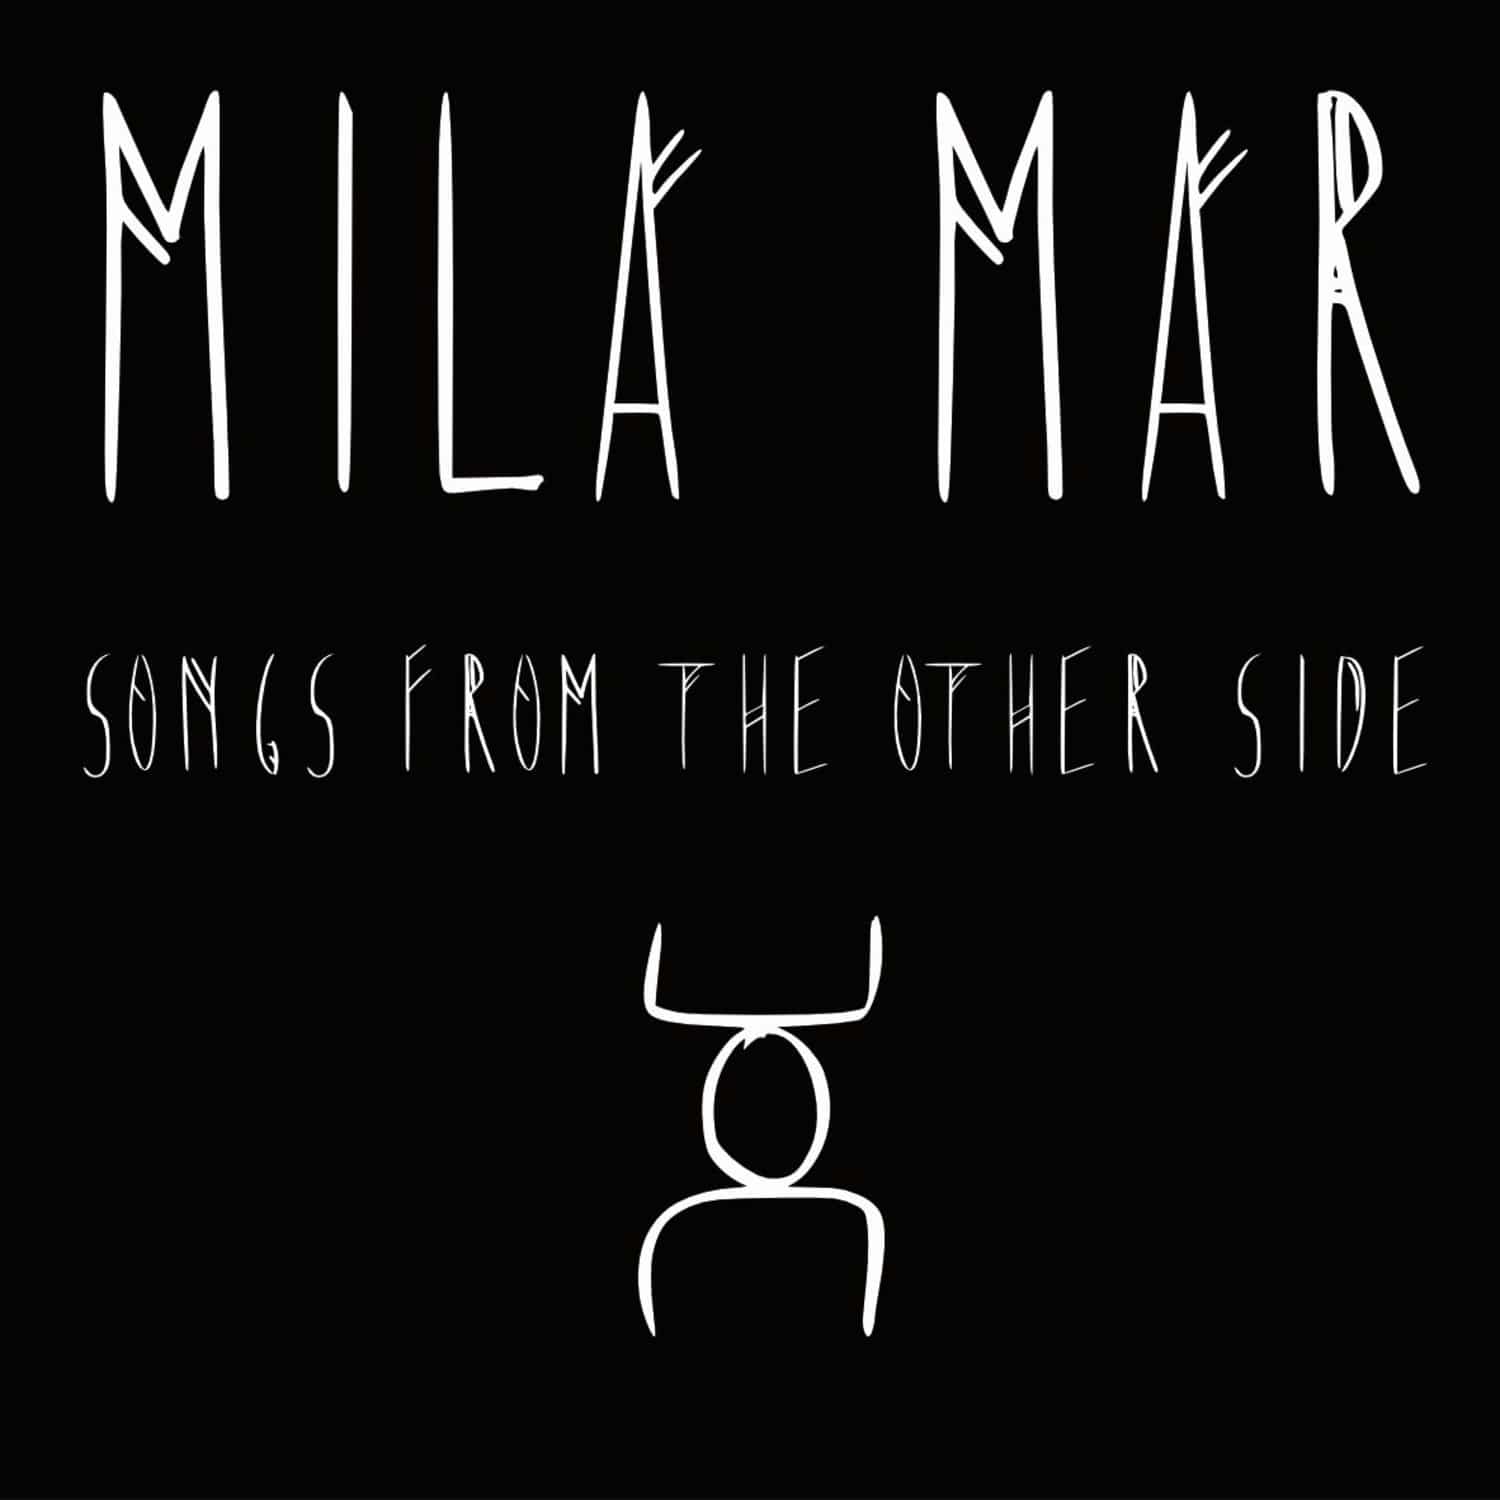 Mila Mar - SONGS FROM THE OTHER SIDE 